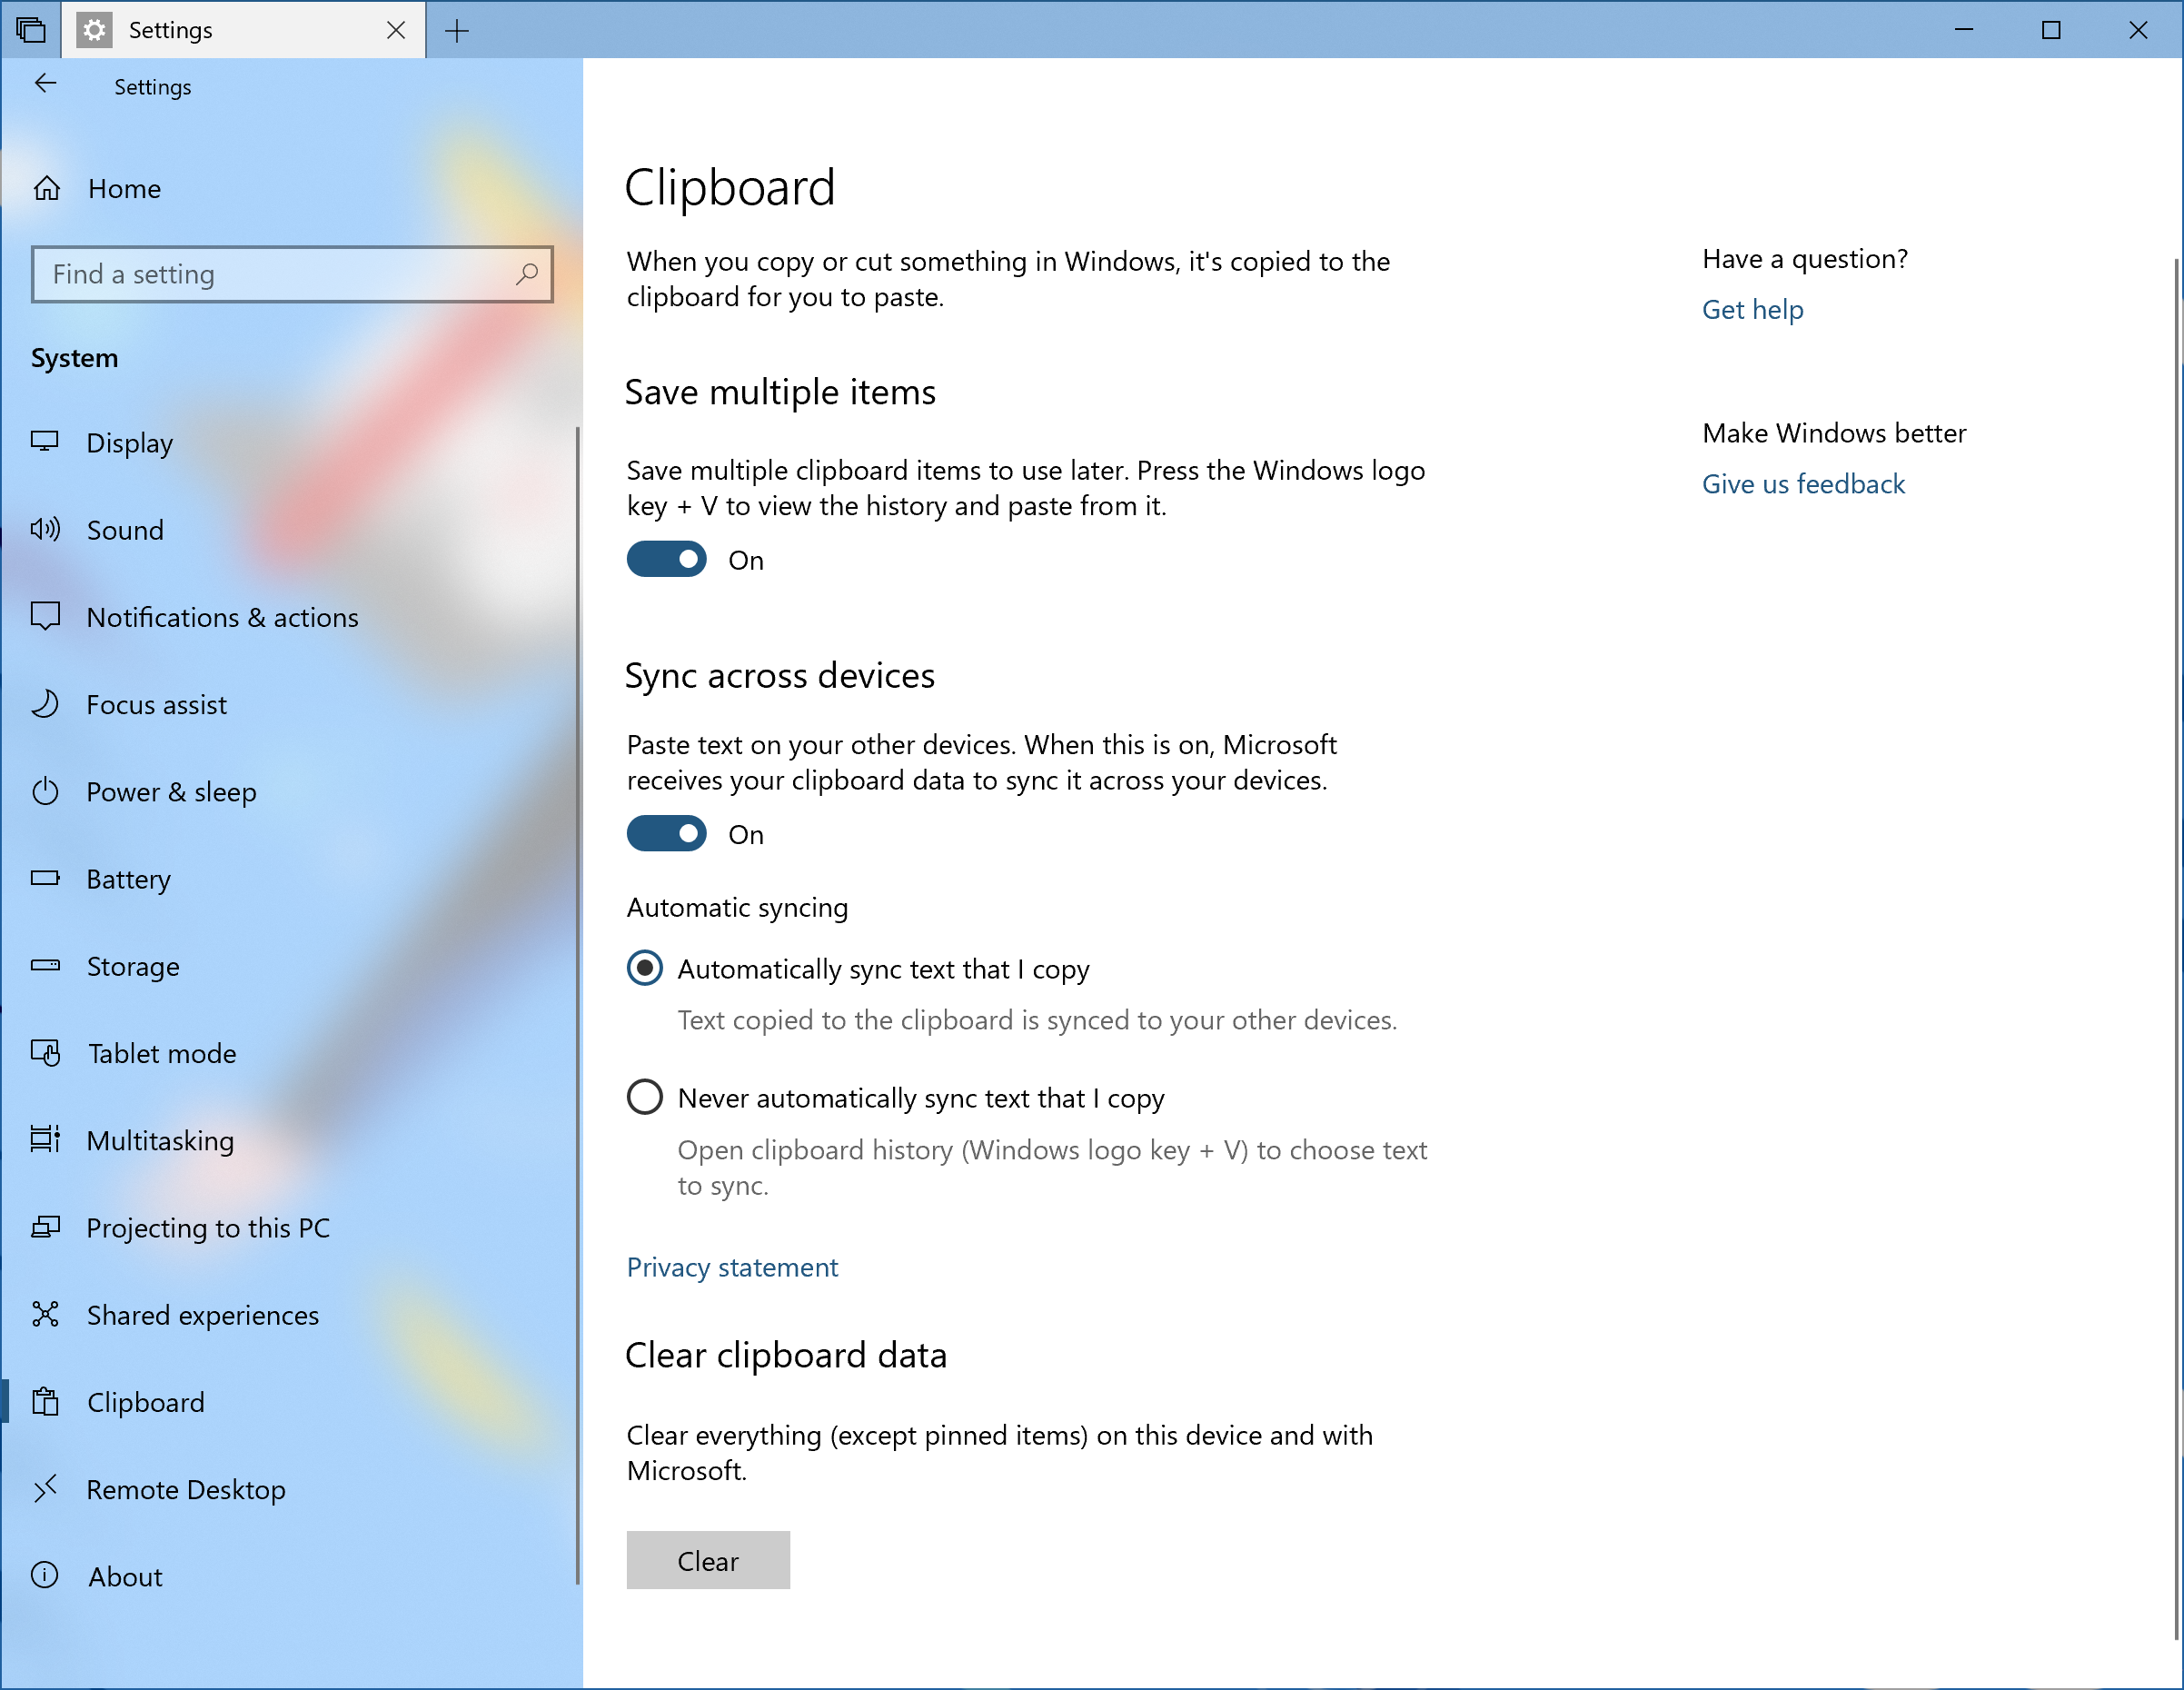 Microsoft's Official Clipboard Manager